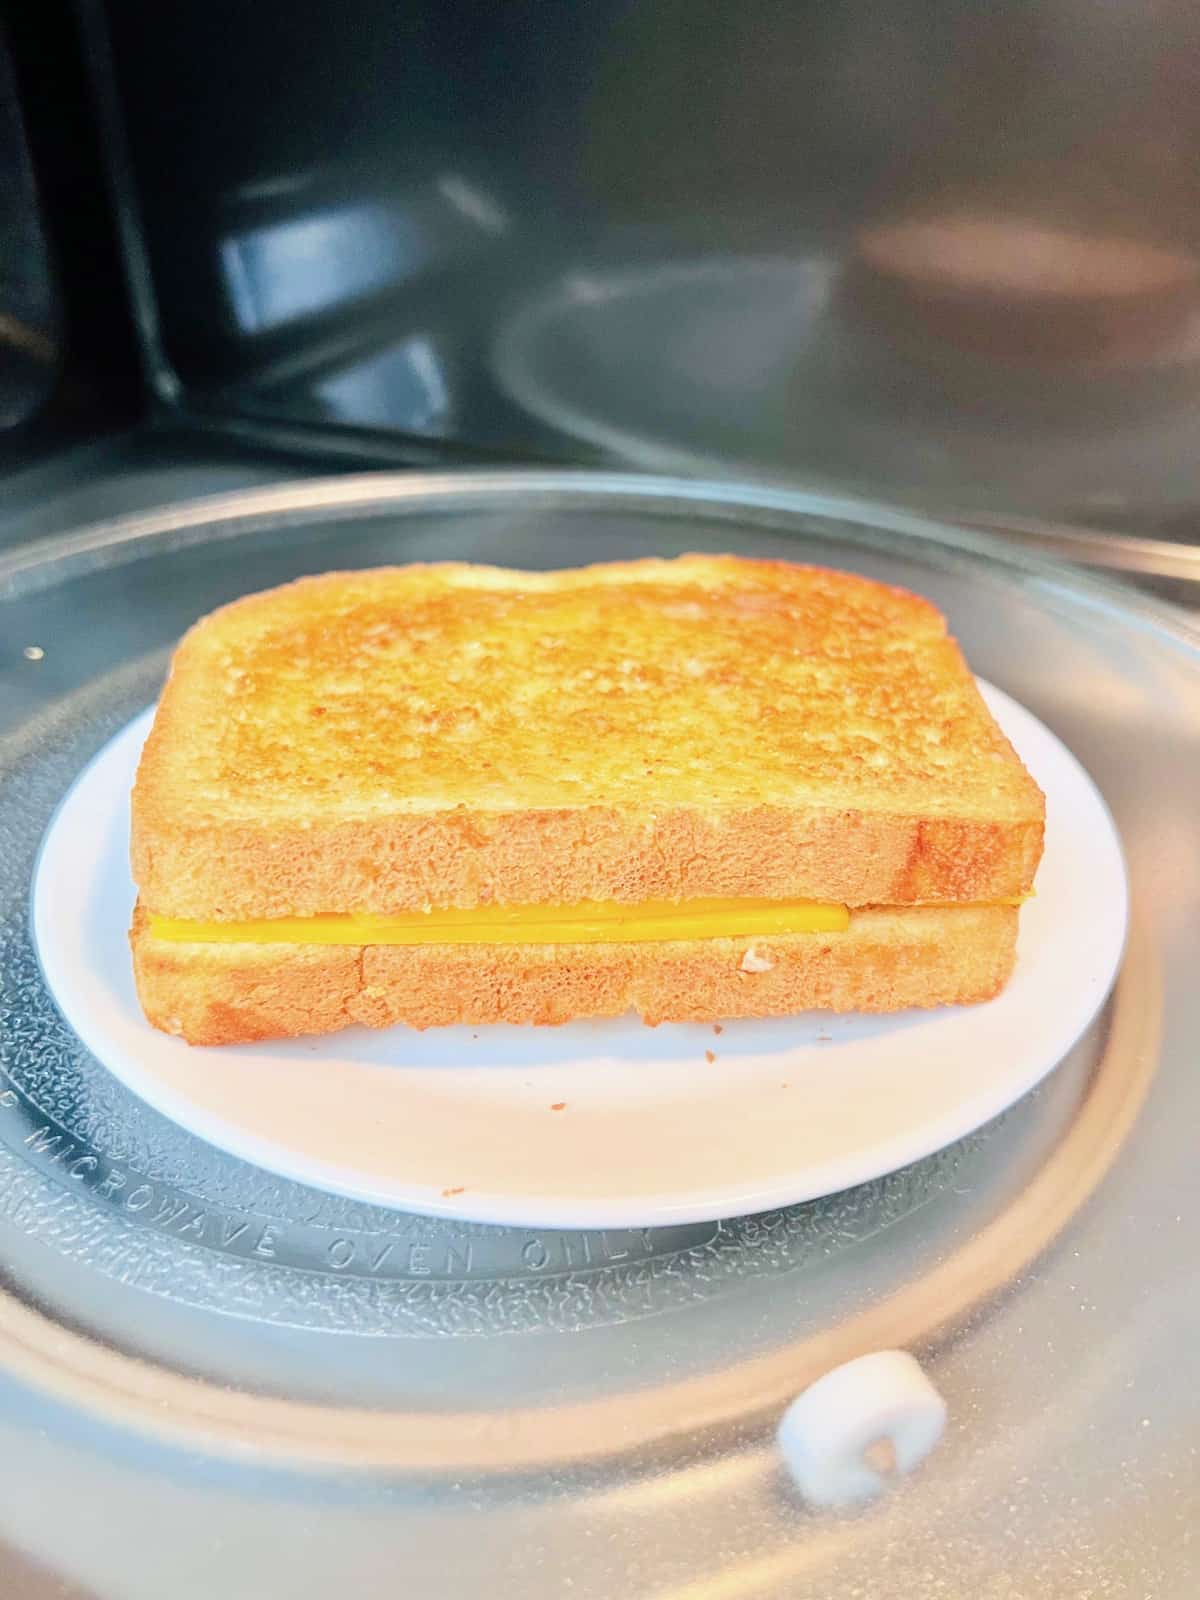 Cheese sandwich Ready to cook in the microwave.